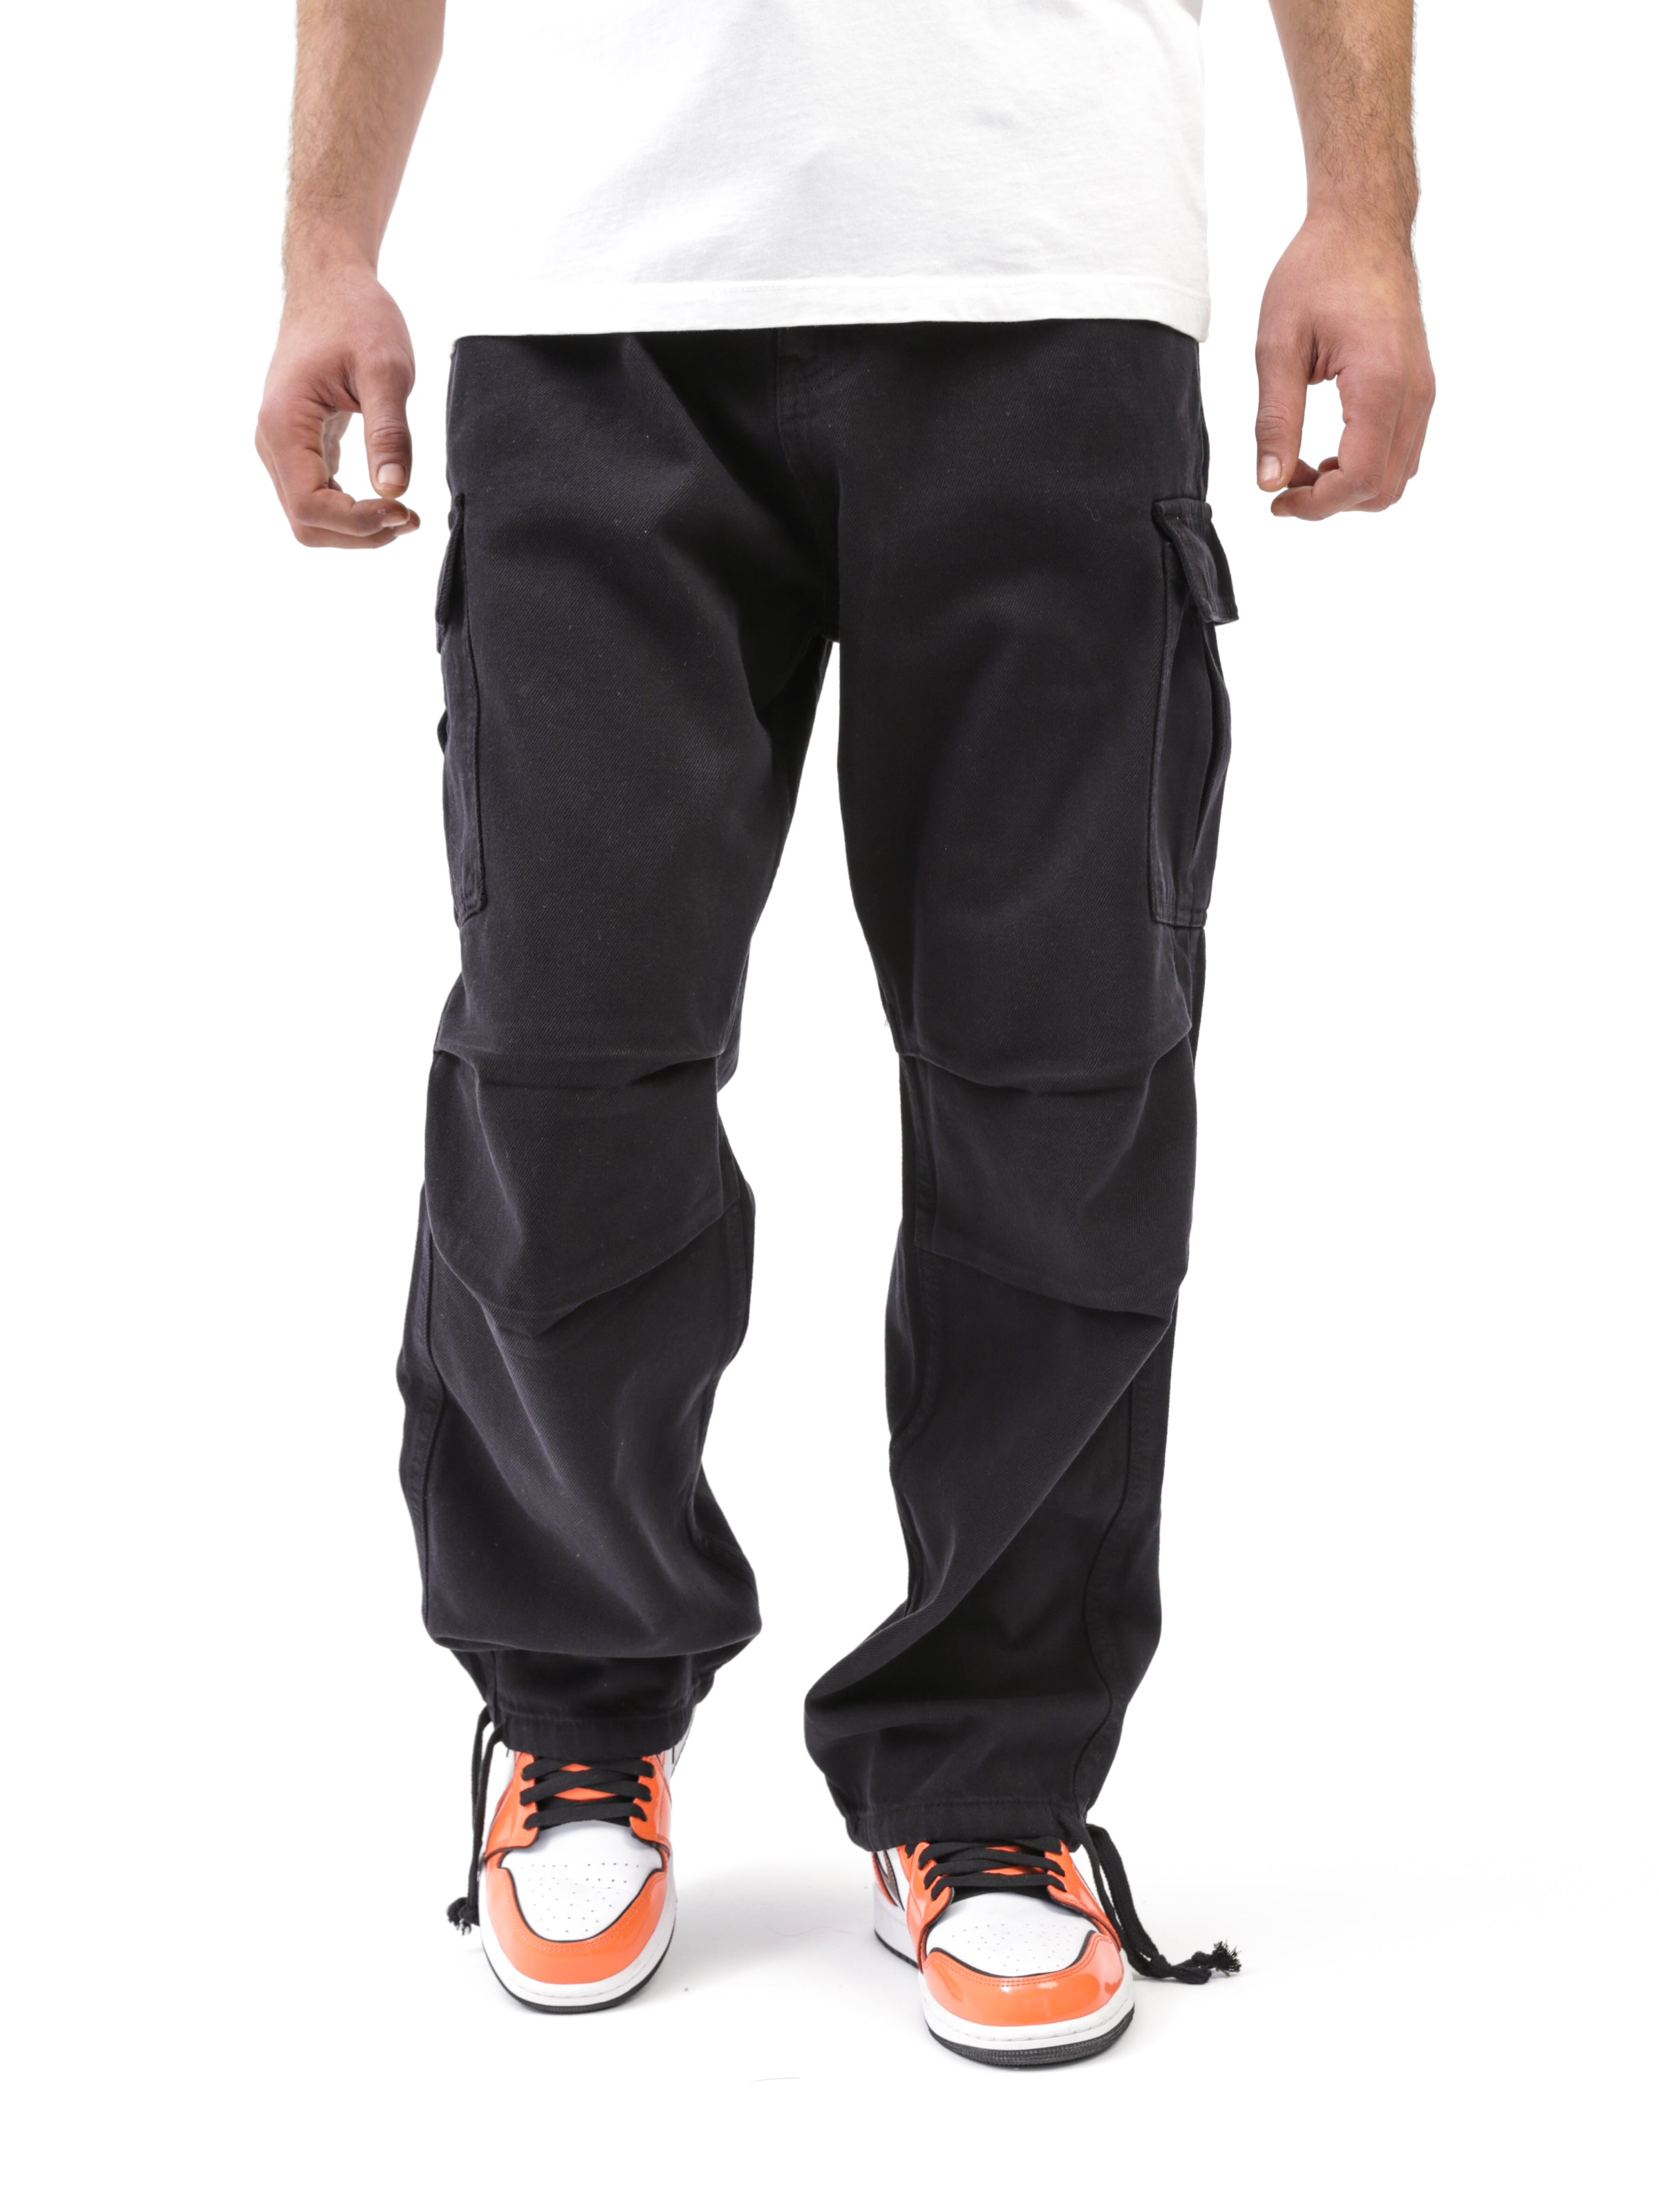 Jeans & Pants | Super and bear black cargo pant | Freeup